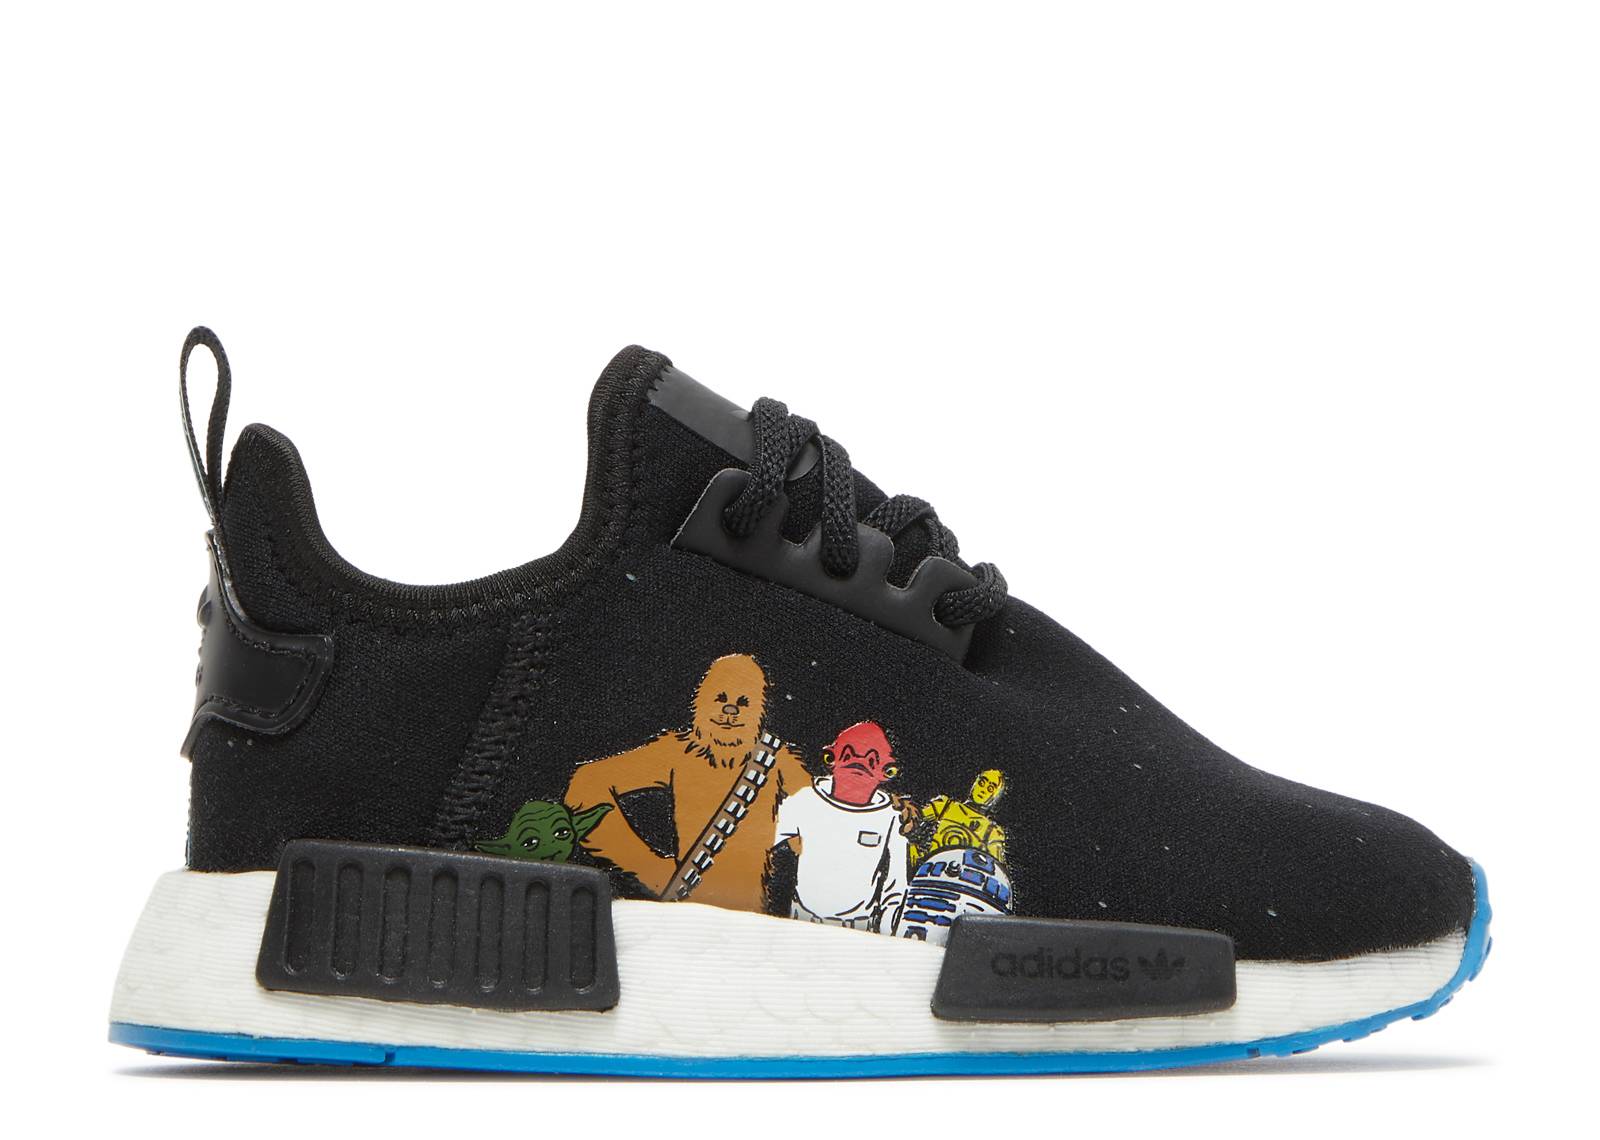 Star Wars x NMD_R1 Infant 'Rebels and the First Order'